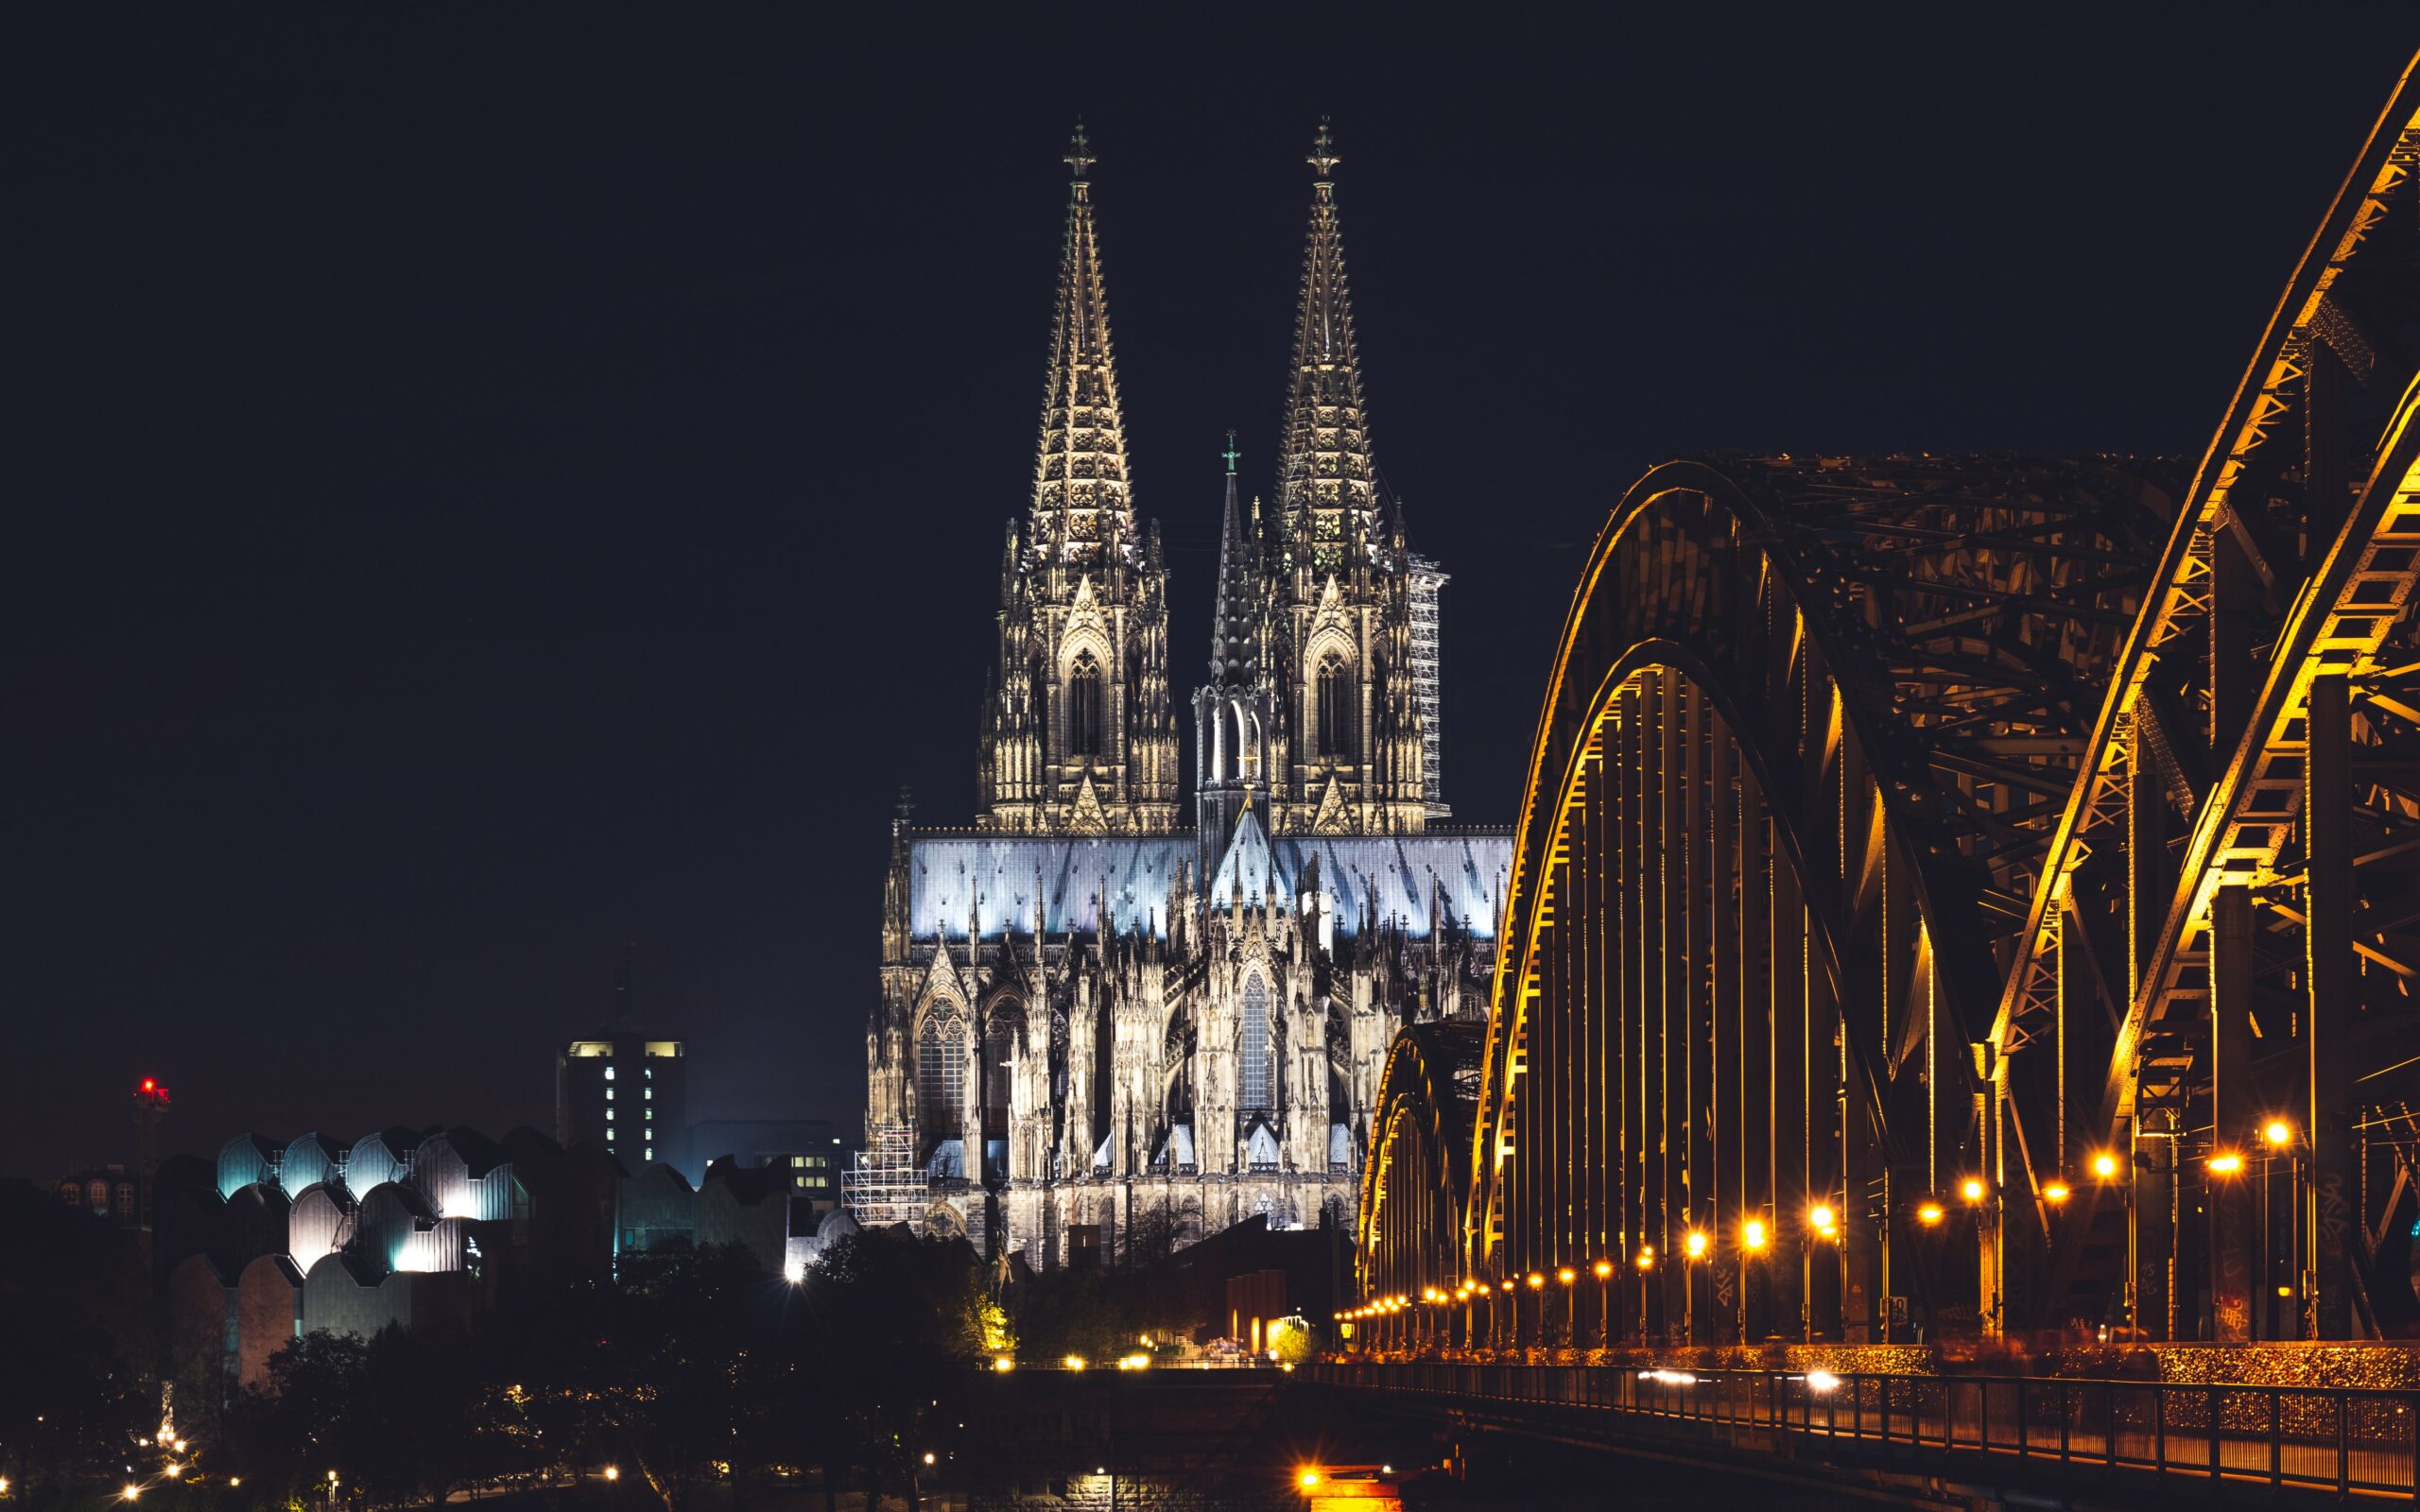 What are the most famous attractions in Germany